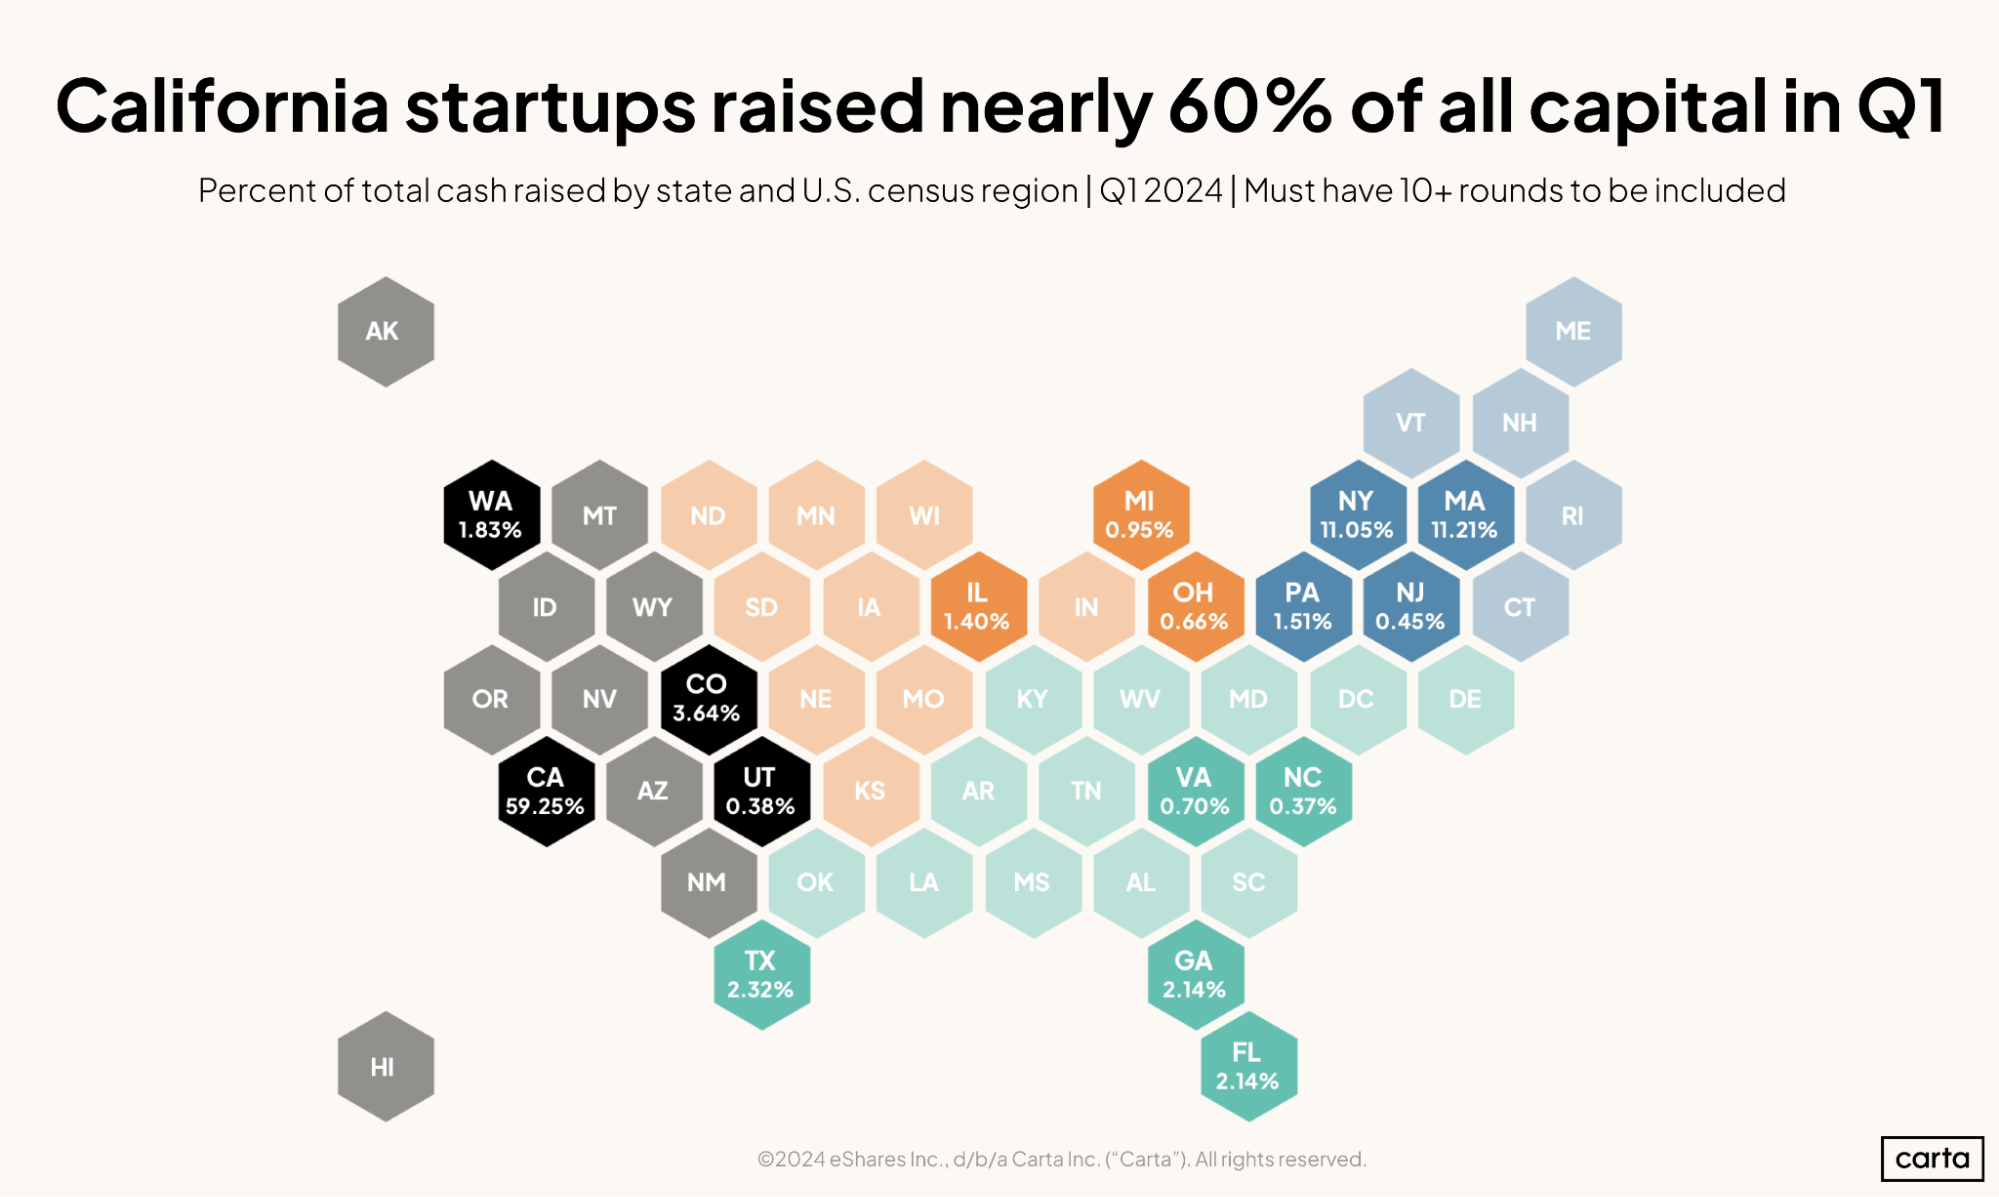 California dominated the VC map in Q1